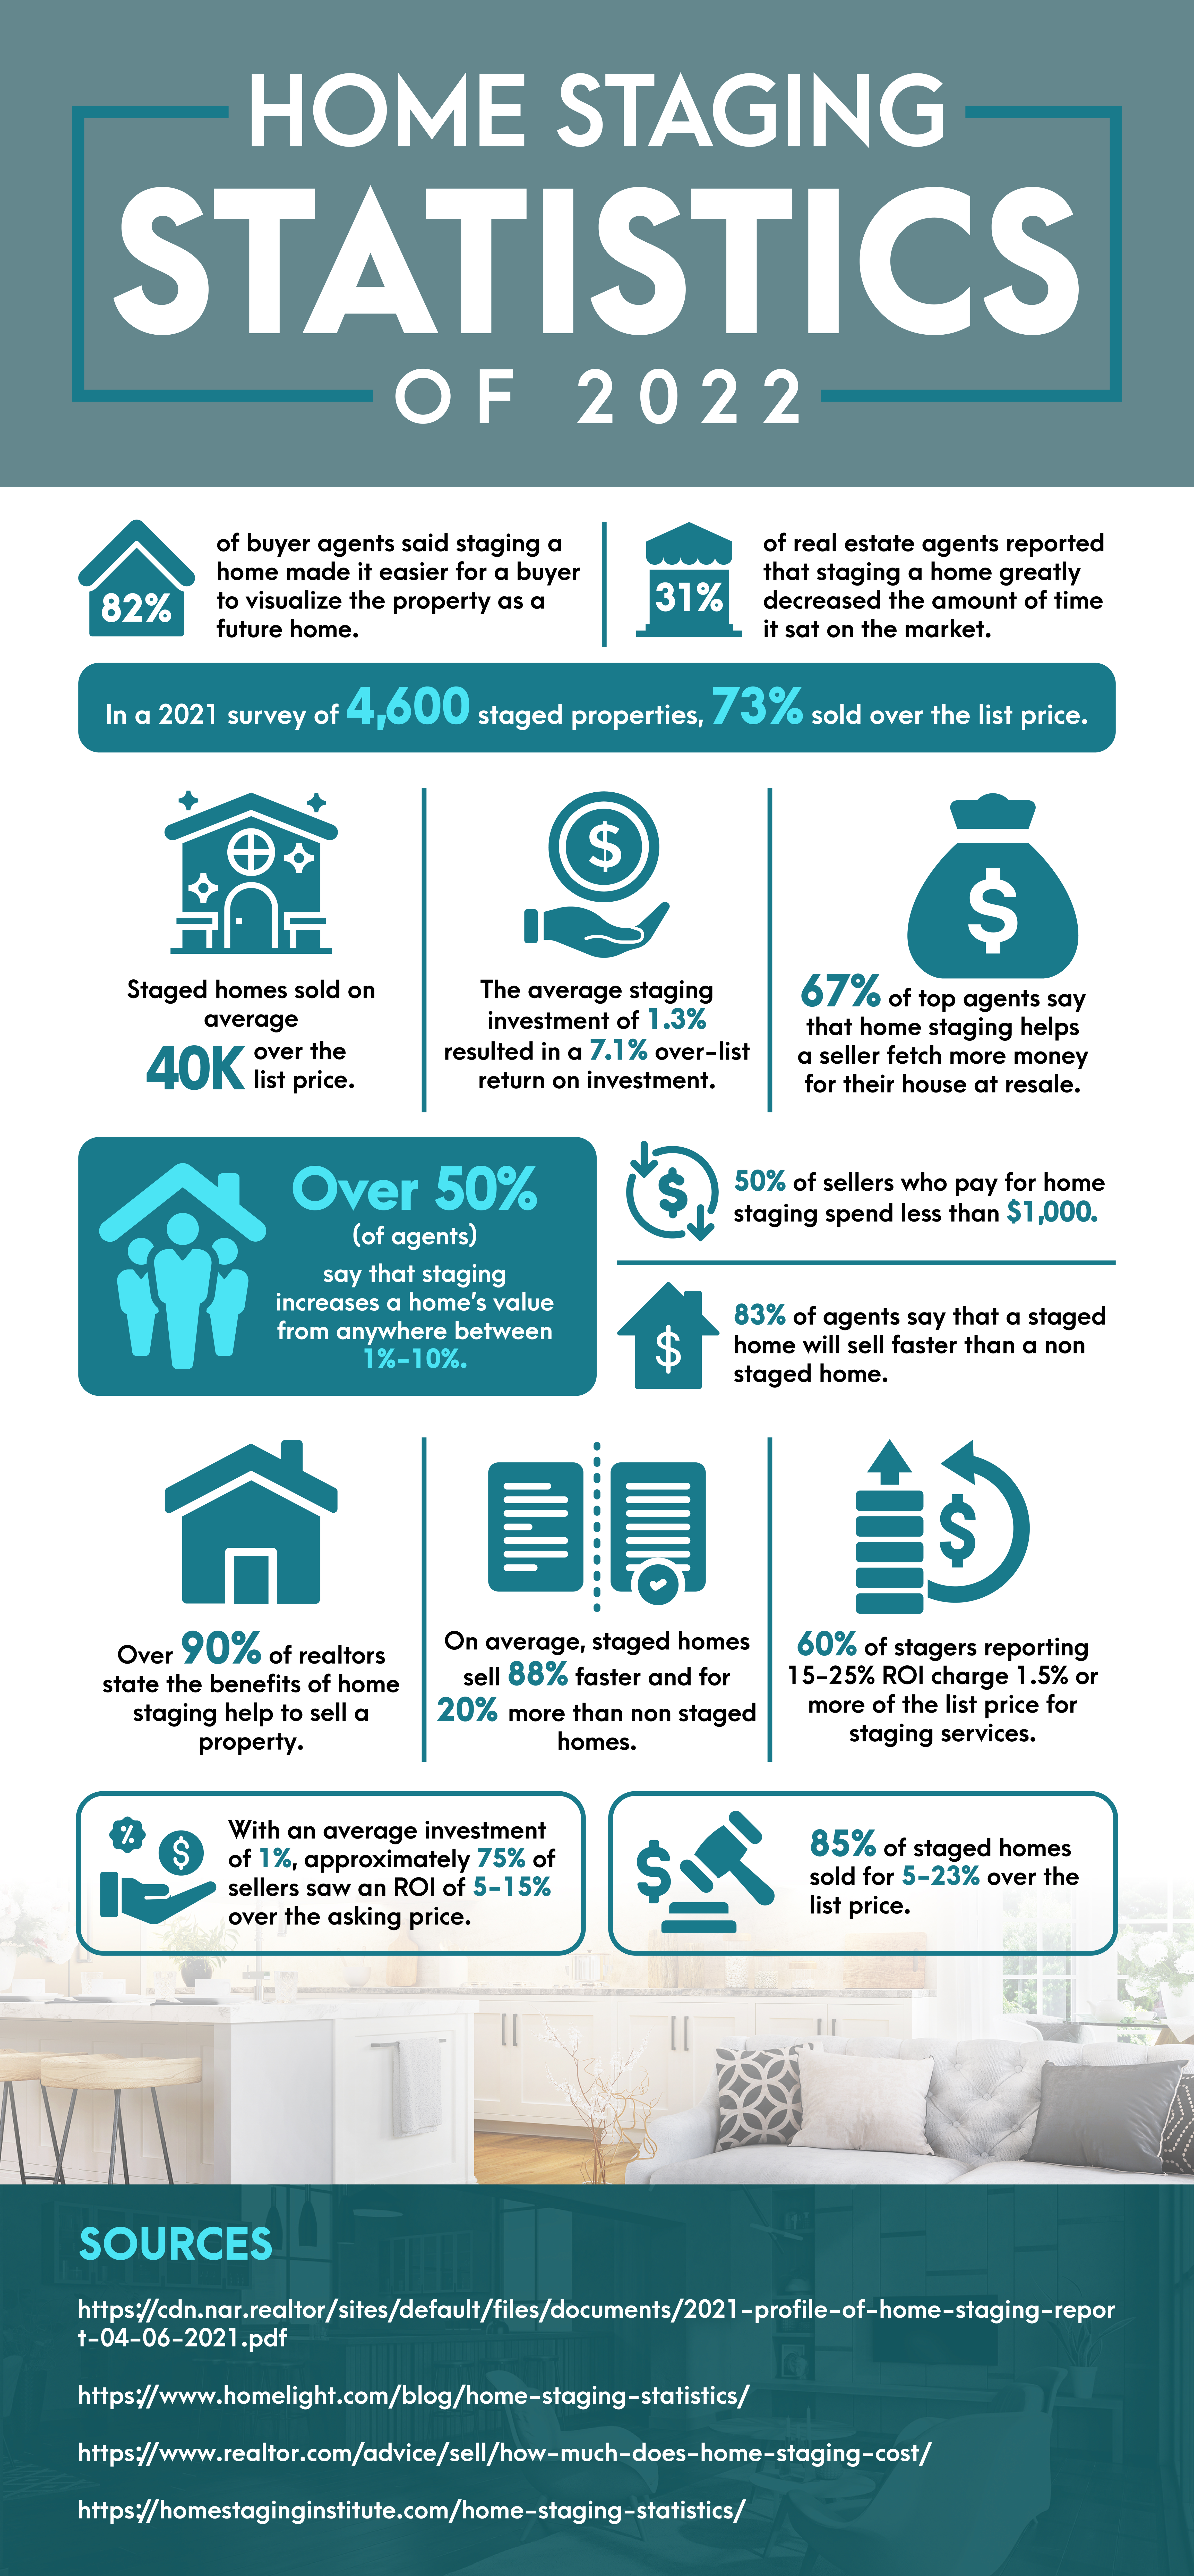 CHS - 2022 Home Staging Statistics - INFOGRAPHIC